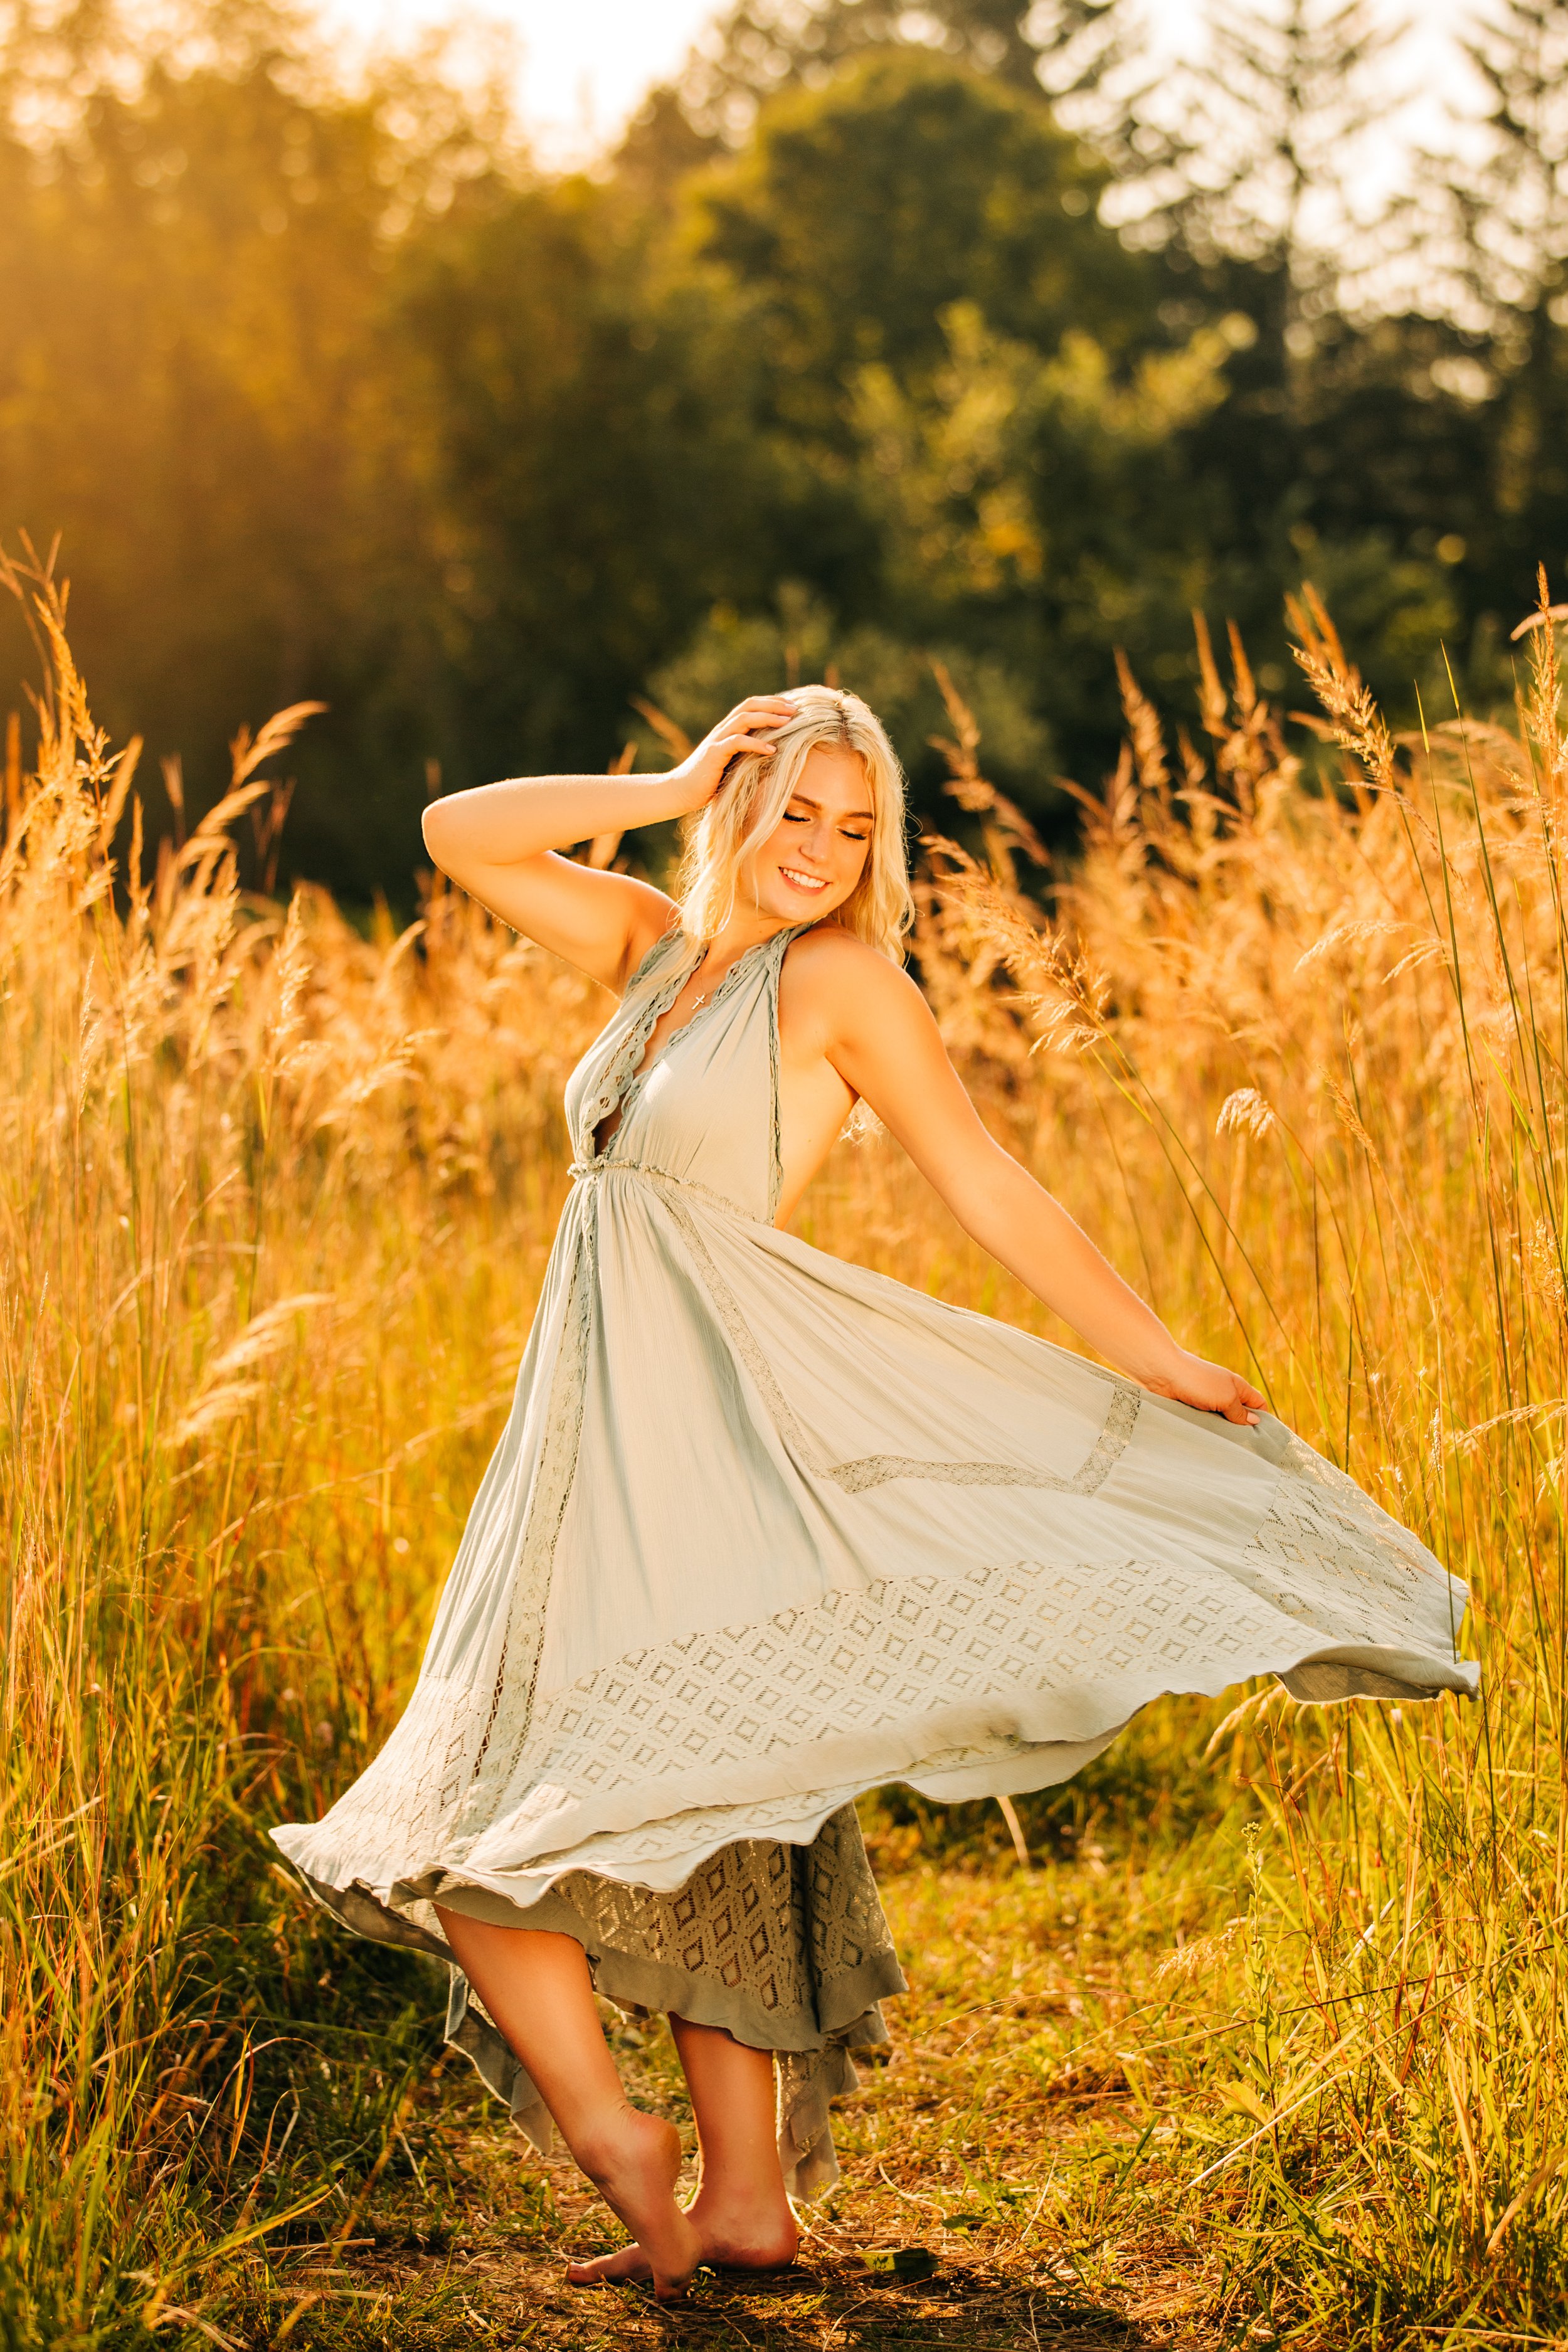 How Many Outfits Should You Bring For Senior Pictures? — Gracefully ...